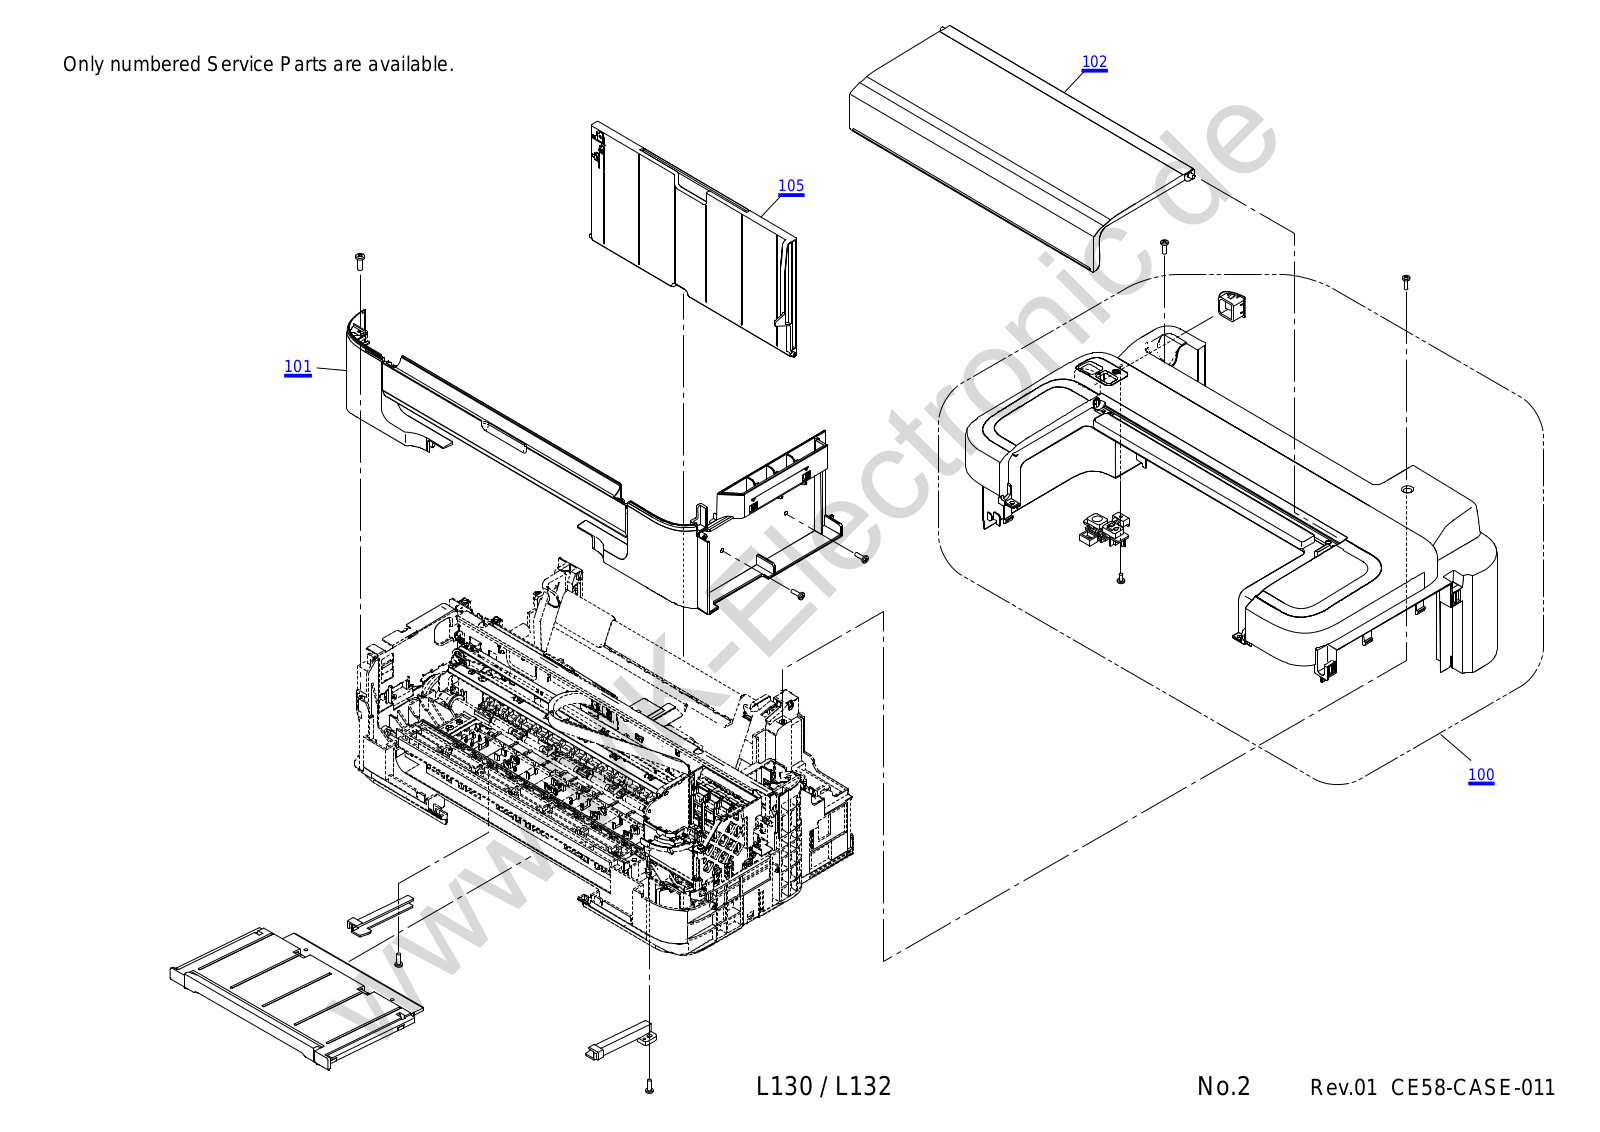 Epson L1800 Exploded Diagrams 1 1024